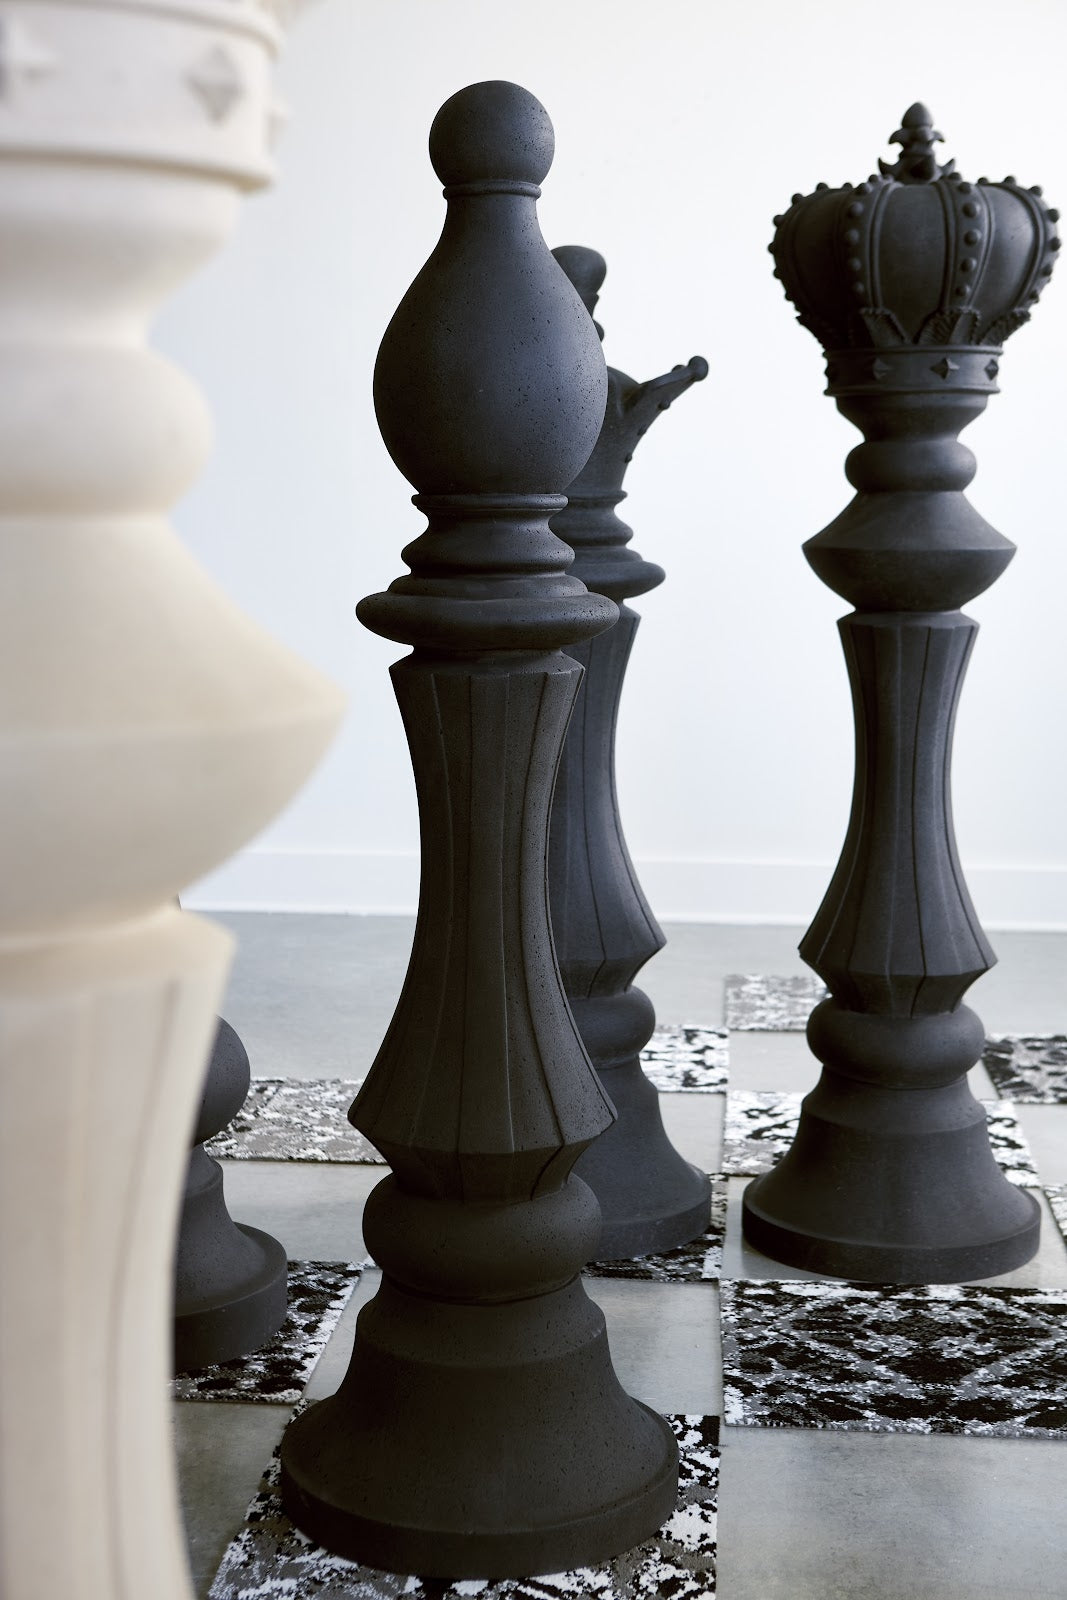 Chess Black Pawn Cast Stone Sculpture (Indoor or Outdoor)